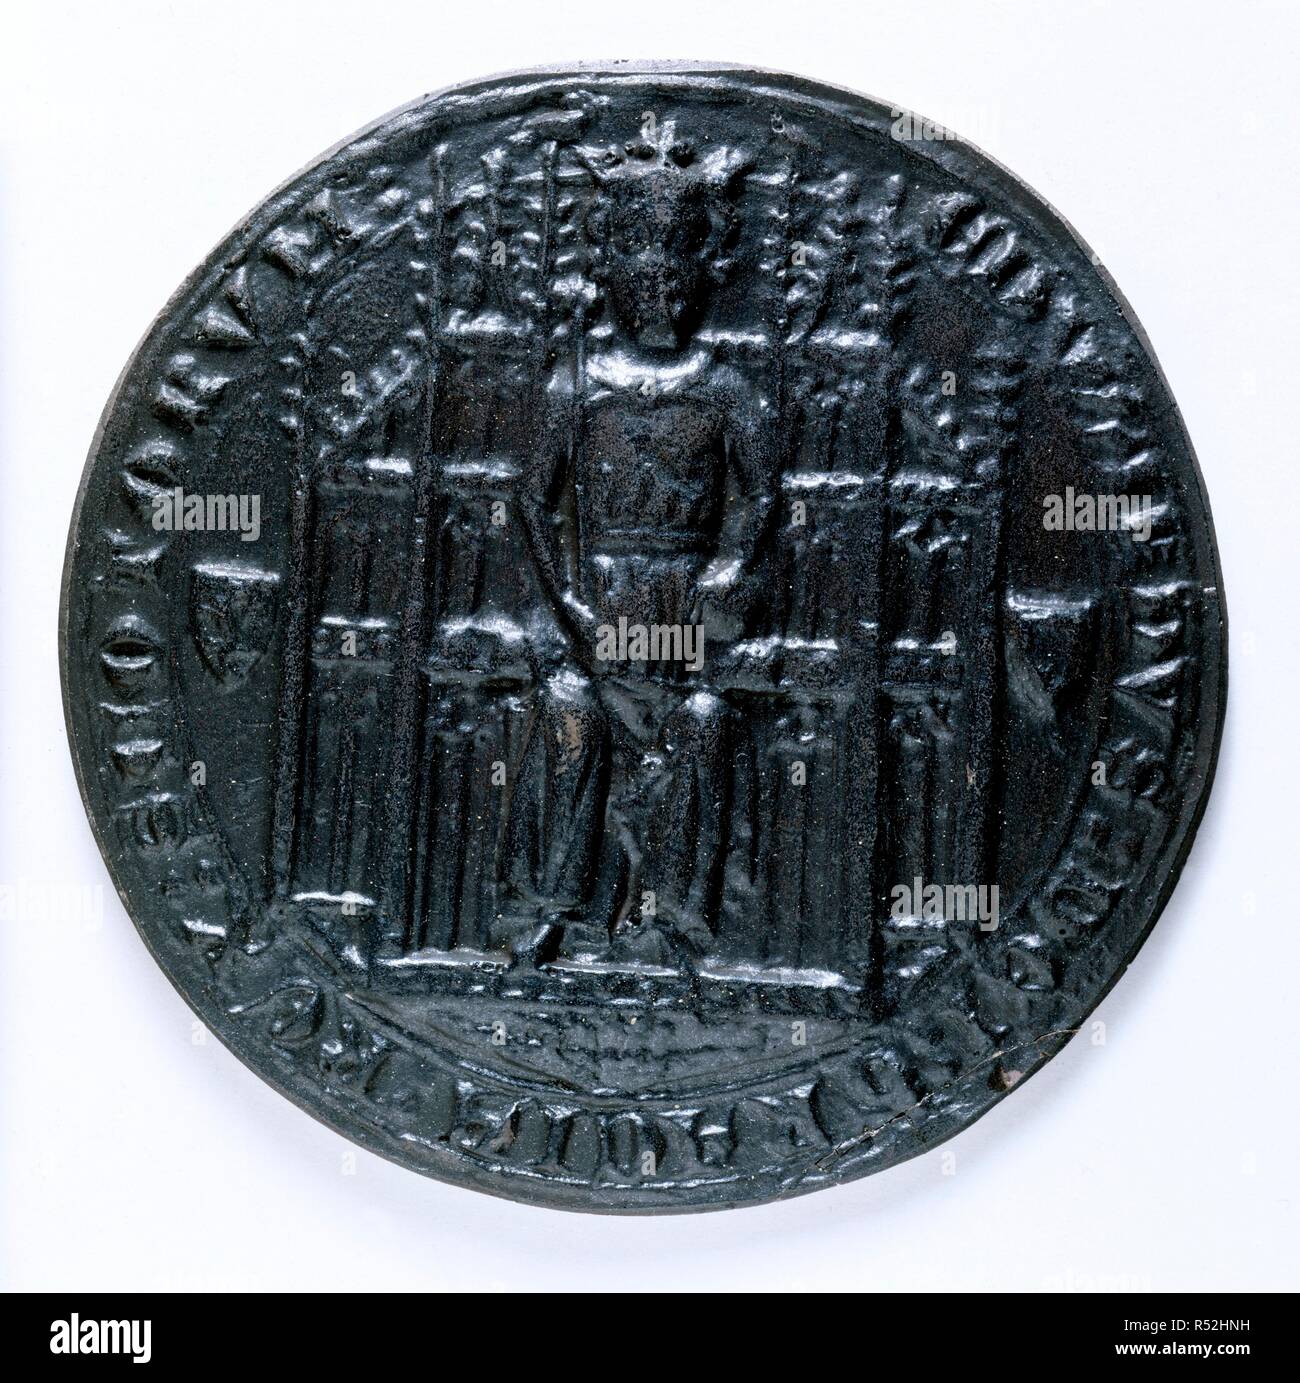 Seal of Edward Balliol. Scotland; circa 1332. [Obverse] Impression of the seal of Edward Balliol, King of the Scots. The king is enthroned, with a crown, and wearing a loose vestment with the mantle fastened across the chest. He holds a sceptre in the right hand, and in the left hand, an orb on a small cushion. The throne is of carved tabernacle work, with crocketted pinnacles; the two nearest the head of the king have doves perched on top, facing each other. Either side of the throne is a heraldic shield, one with a lion rampant, the other, an orle  Originally published/produced in Scotland;  Stock Photo